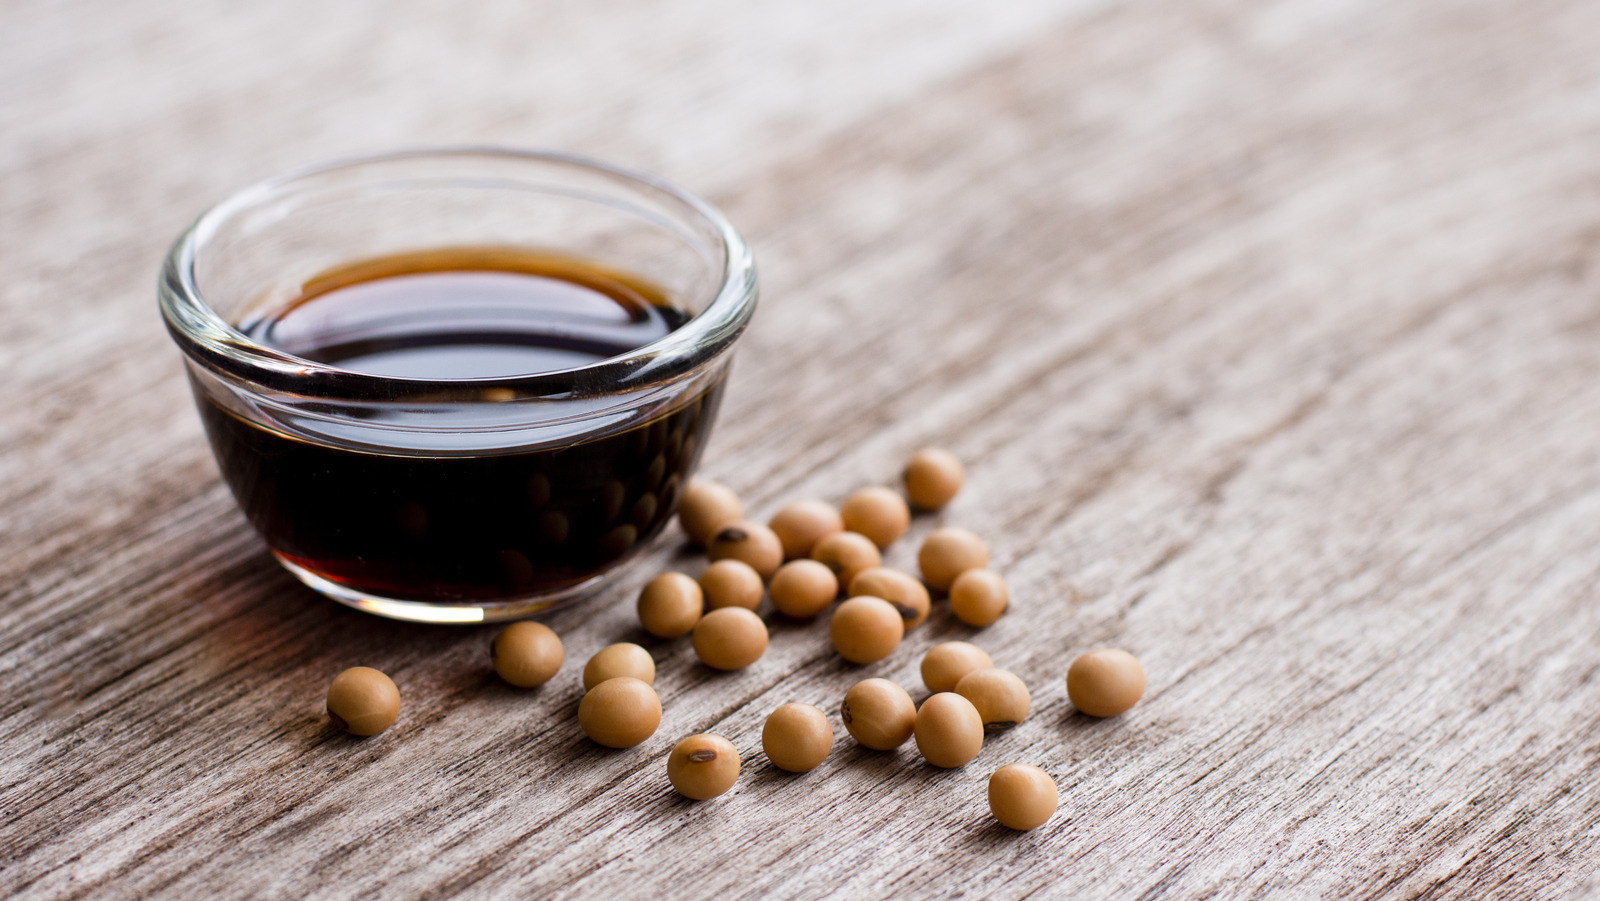 What Is The Difference Between Soy Sauce And Tamari Sauce? And Why